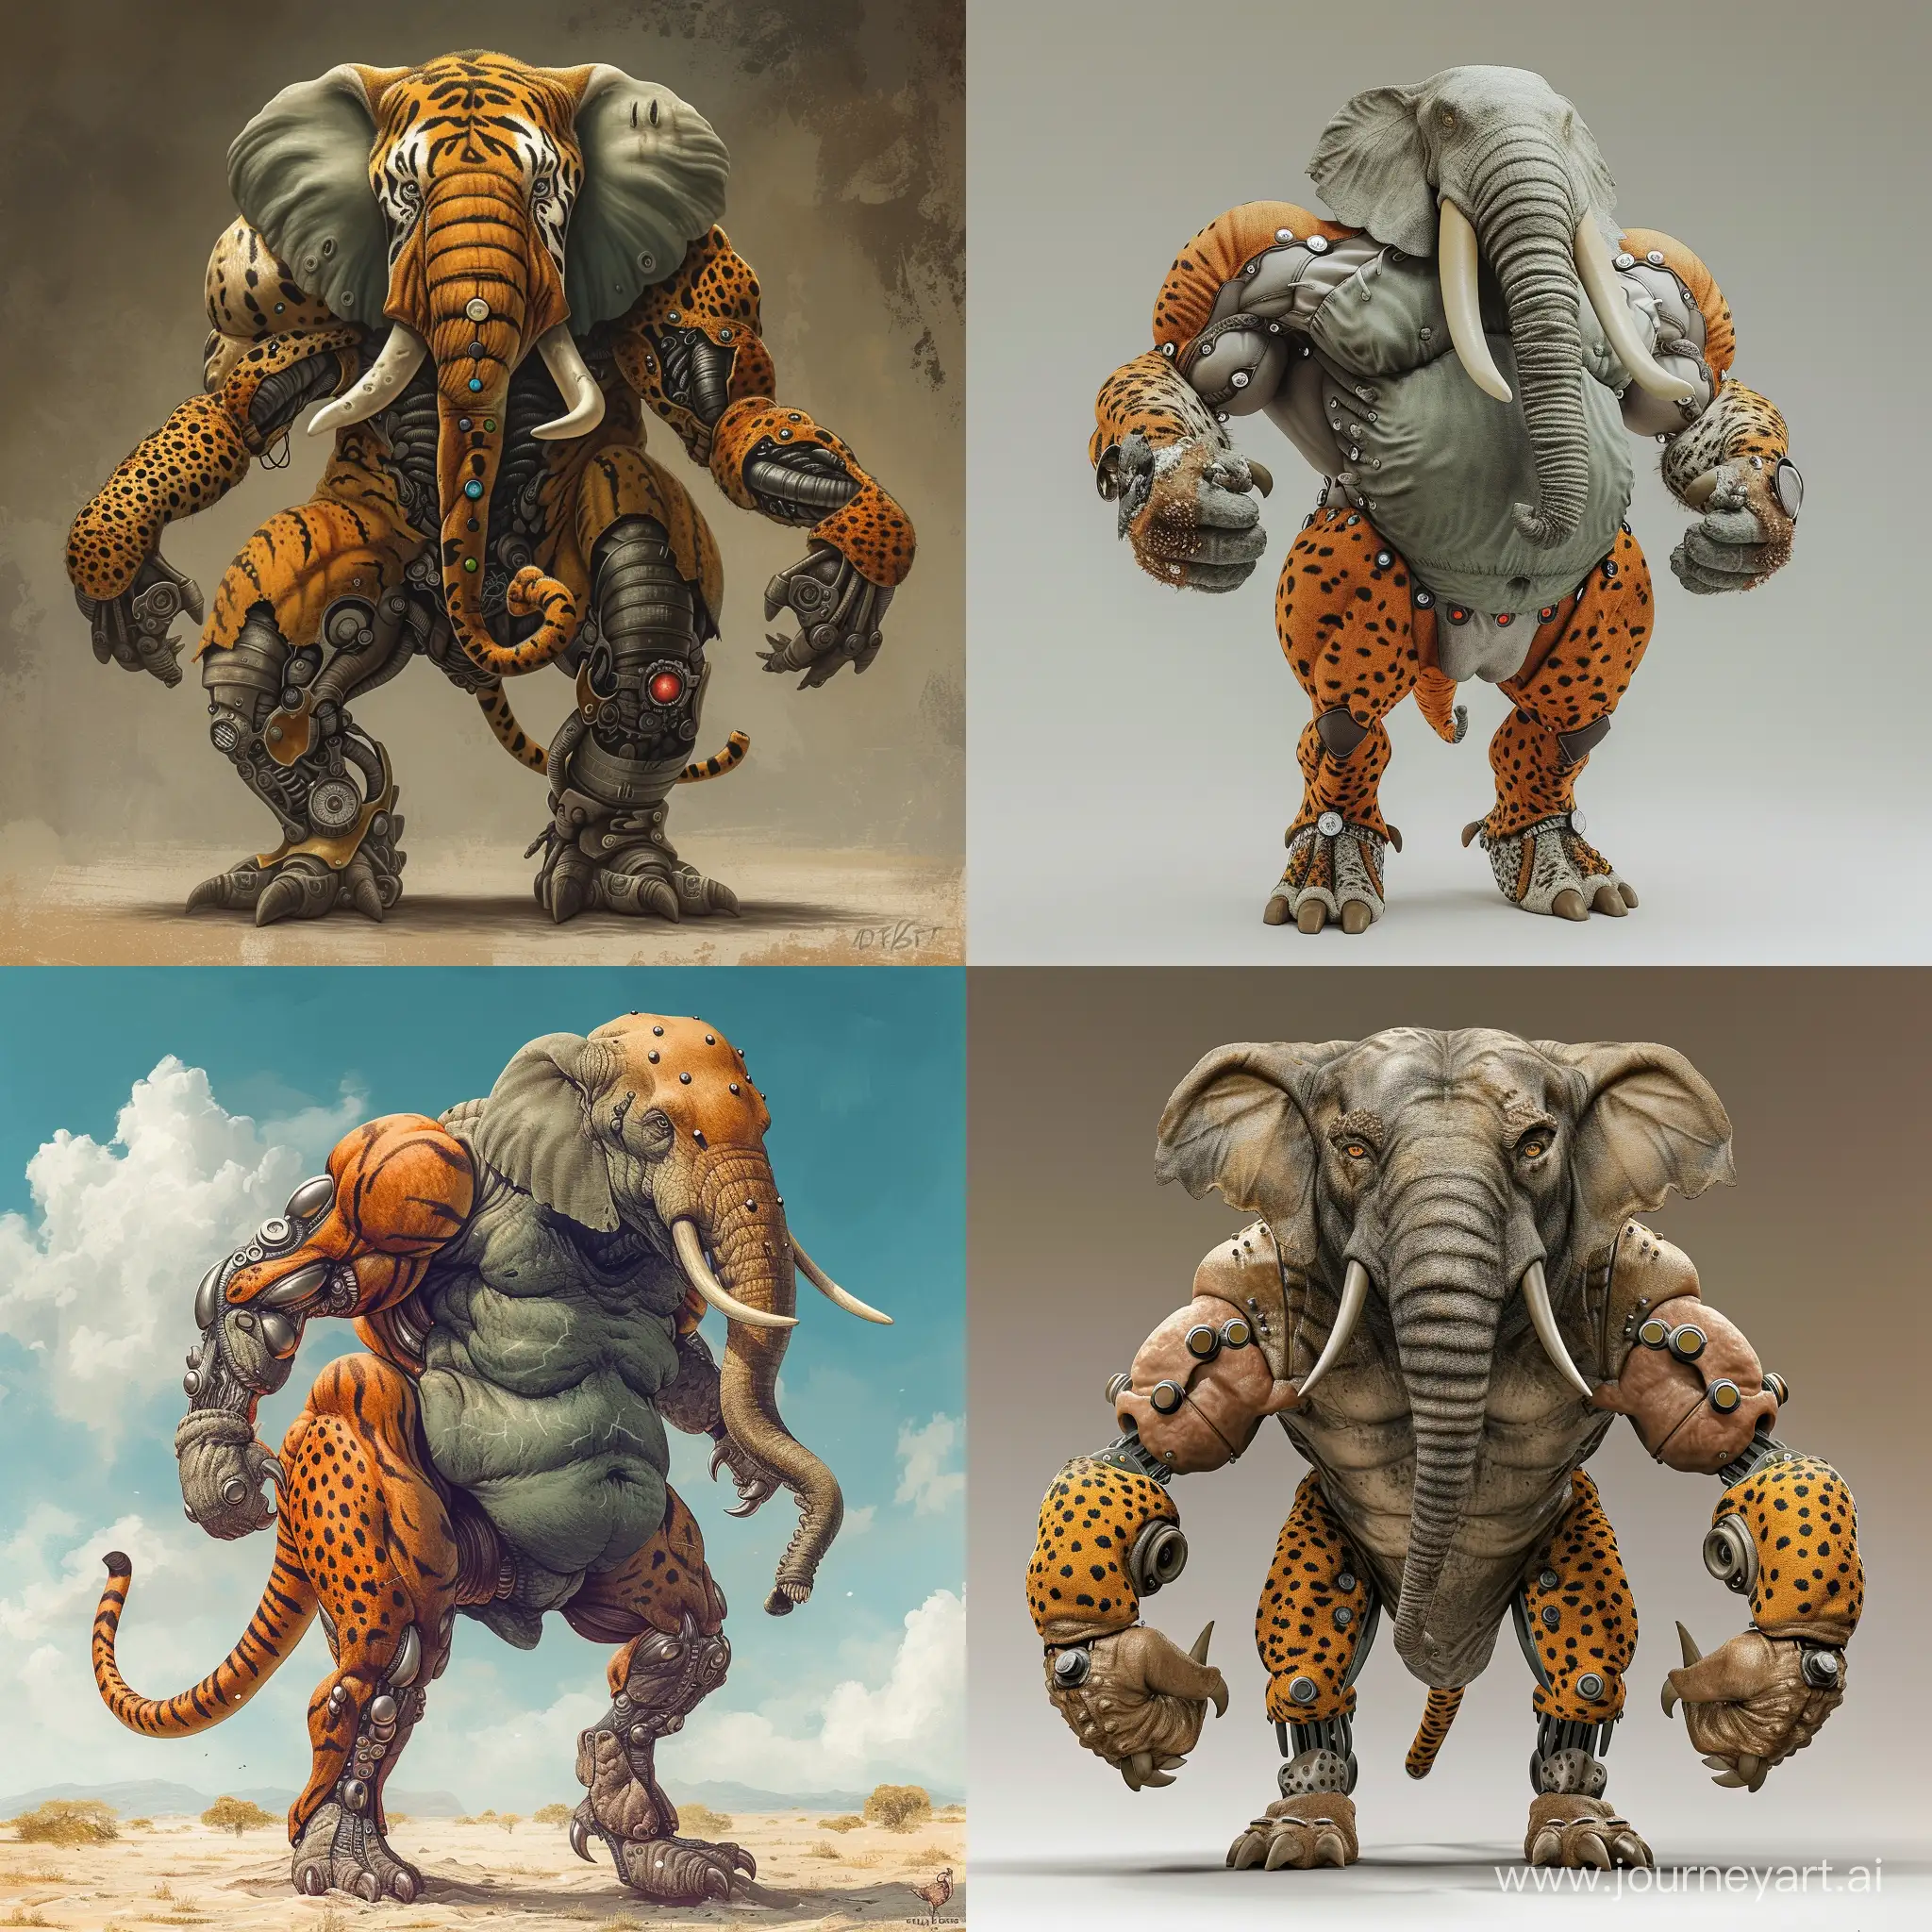 Hybrid-Beast-with-Elephant-Body-Tiger-Arms-Cheetah-Legs-and-TRex-Head